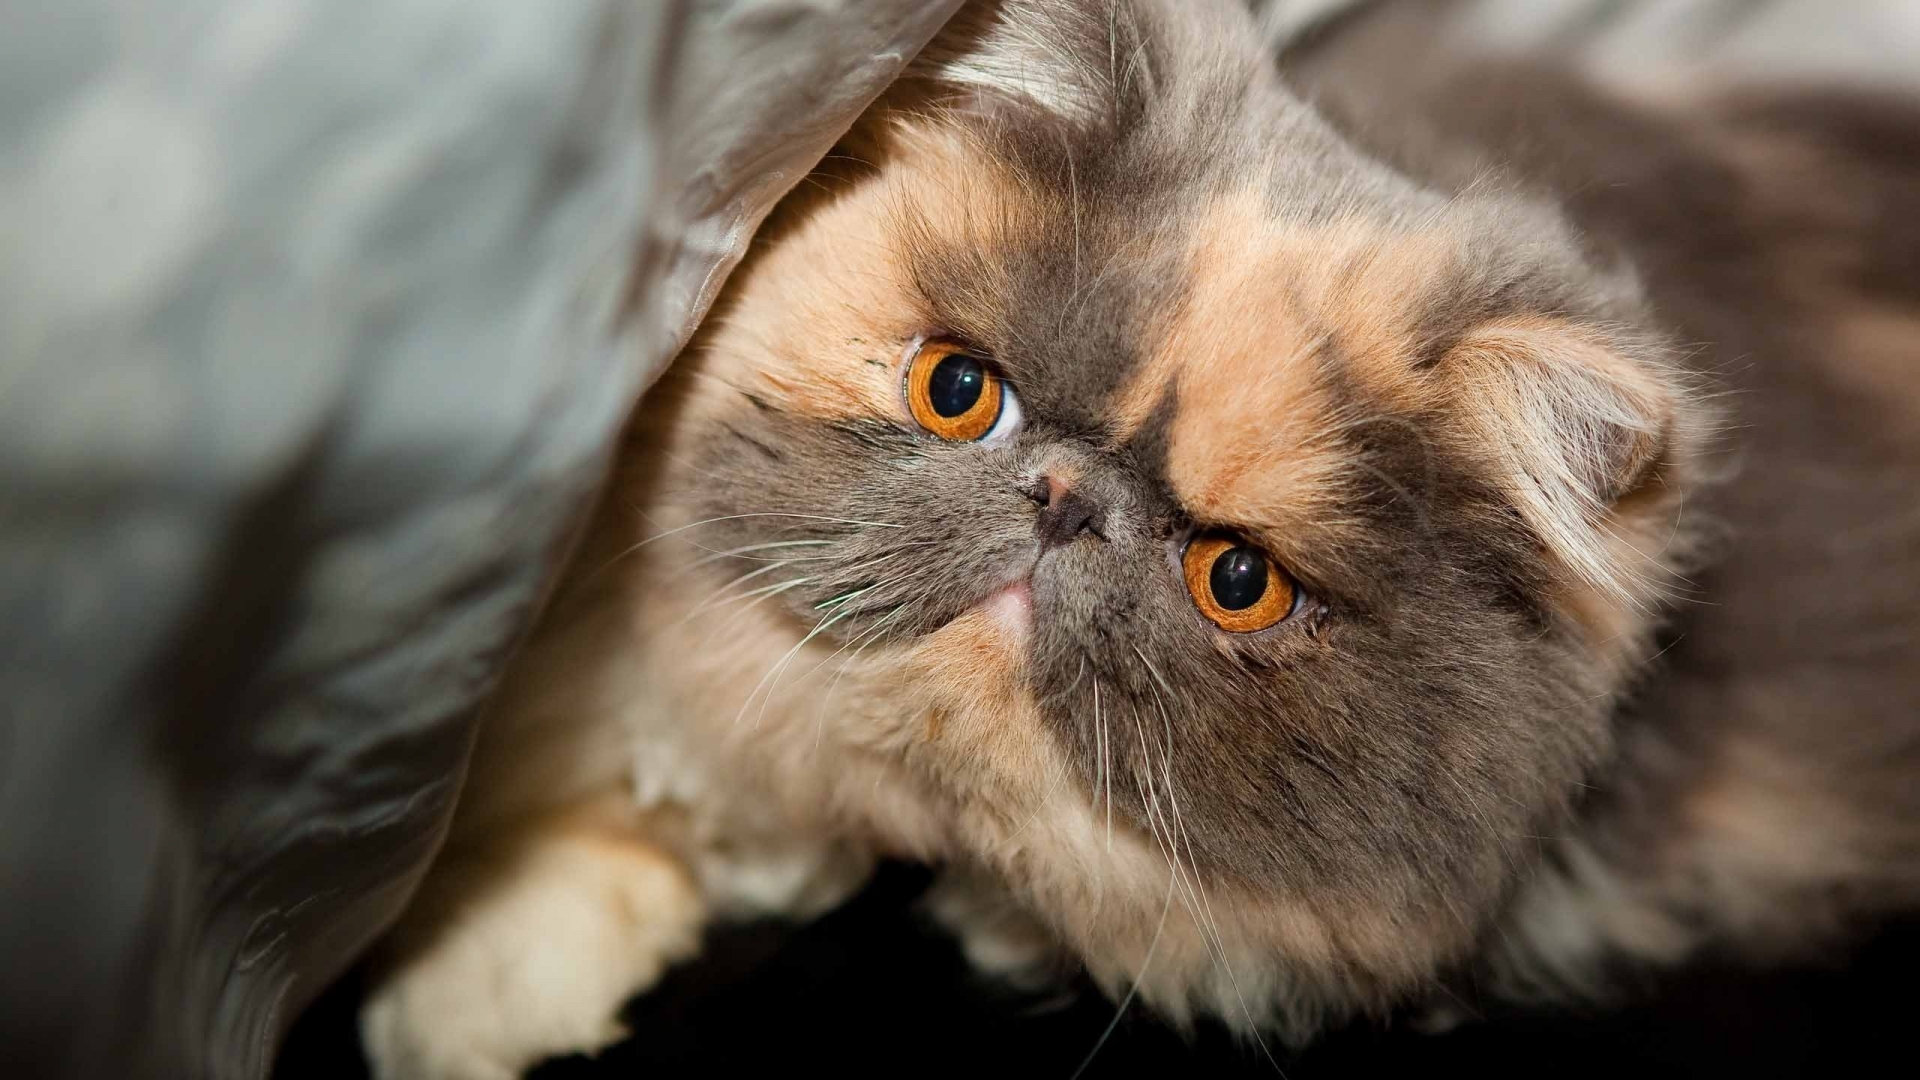 Beautiful Exotic Shorthair for 1920 x 1080 HDTV 1080p resolution